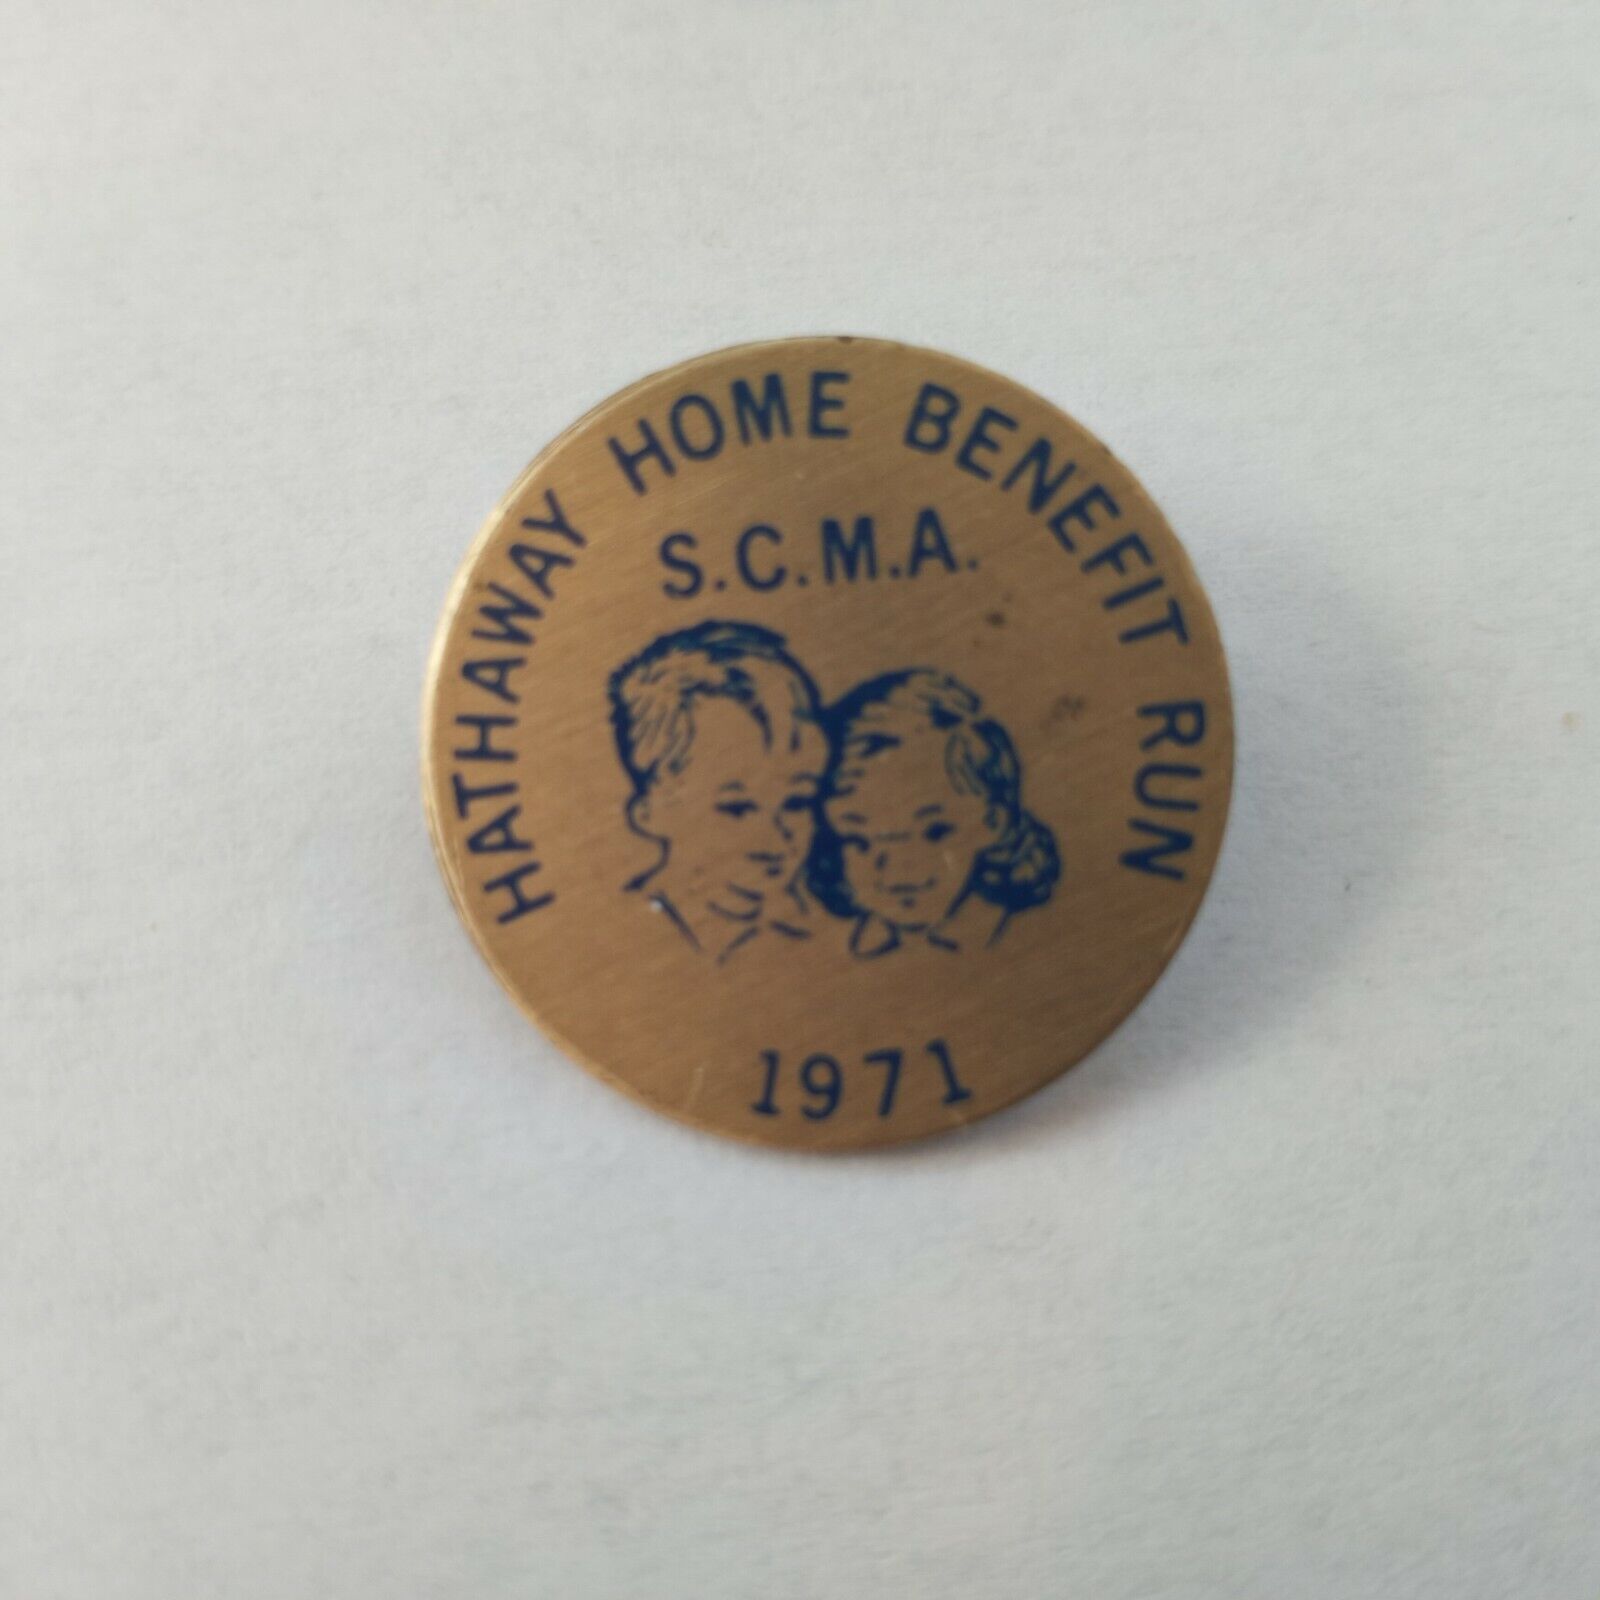 Motorcycle Pin S.C.M.A HATHAWAY HOUSE BENEFIT RUN 1971 JACKET VEST PIN HAT